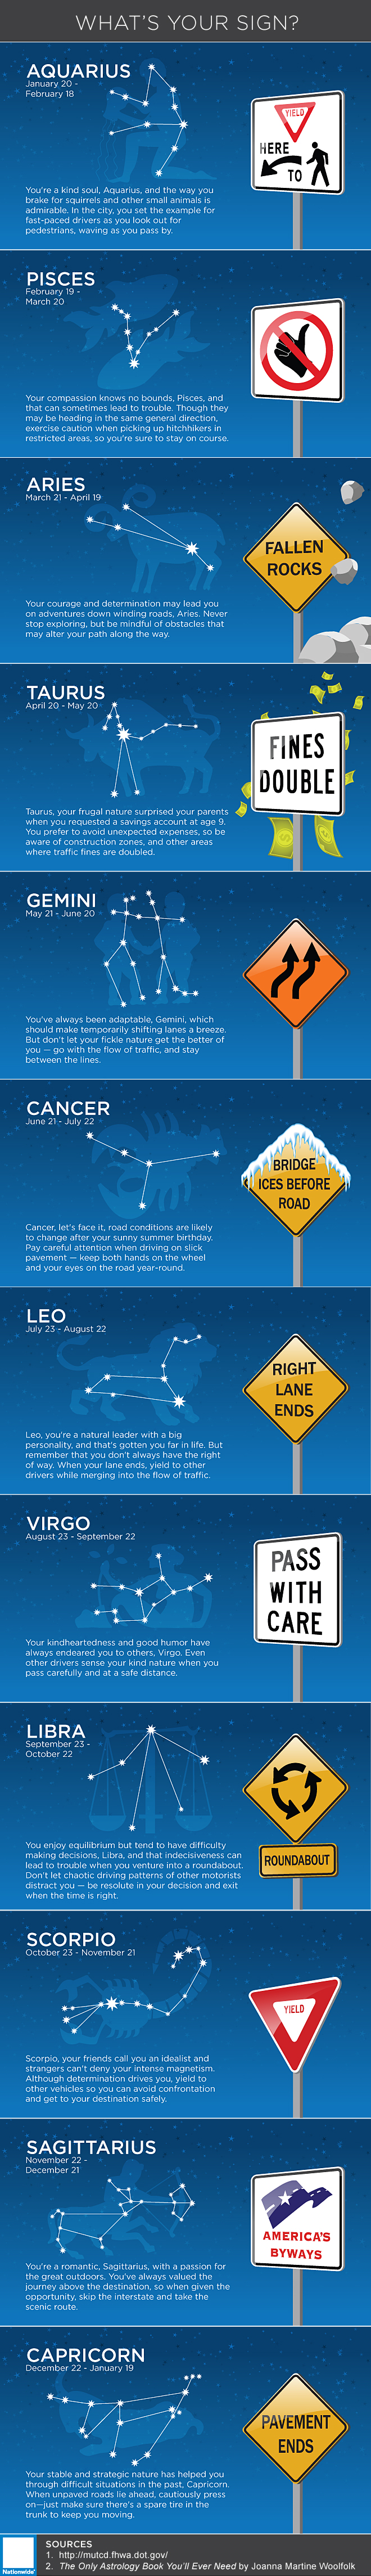 What's Your Sign? - Horoscope infographic from Nationwide.com